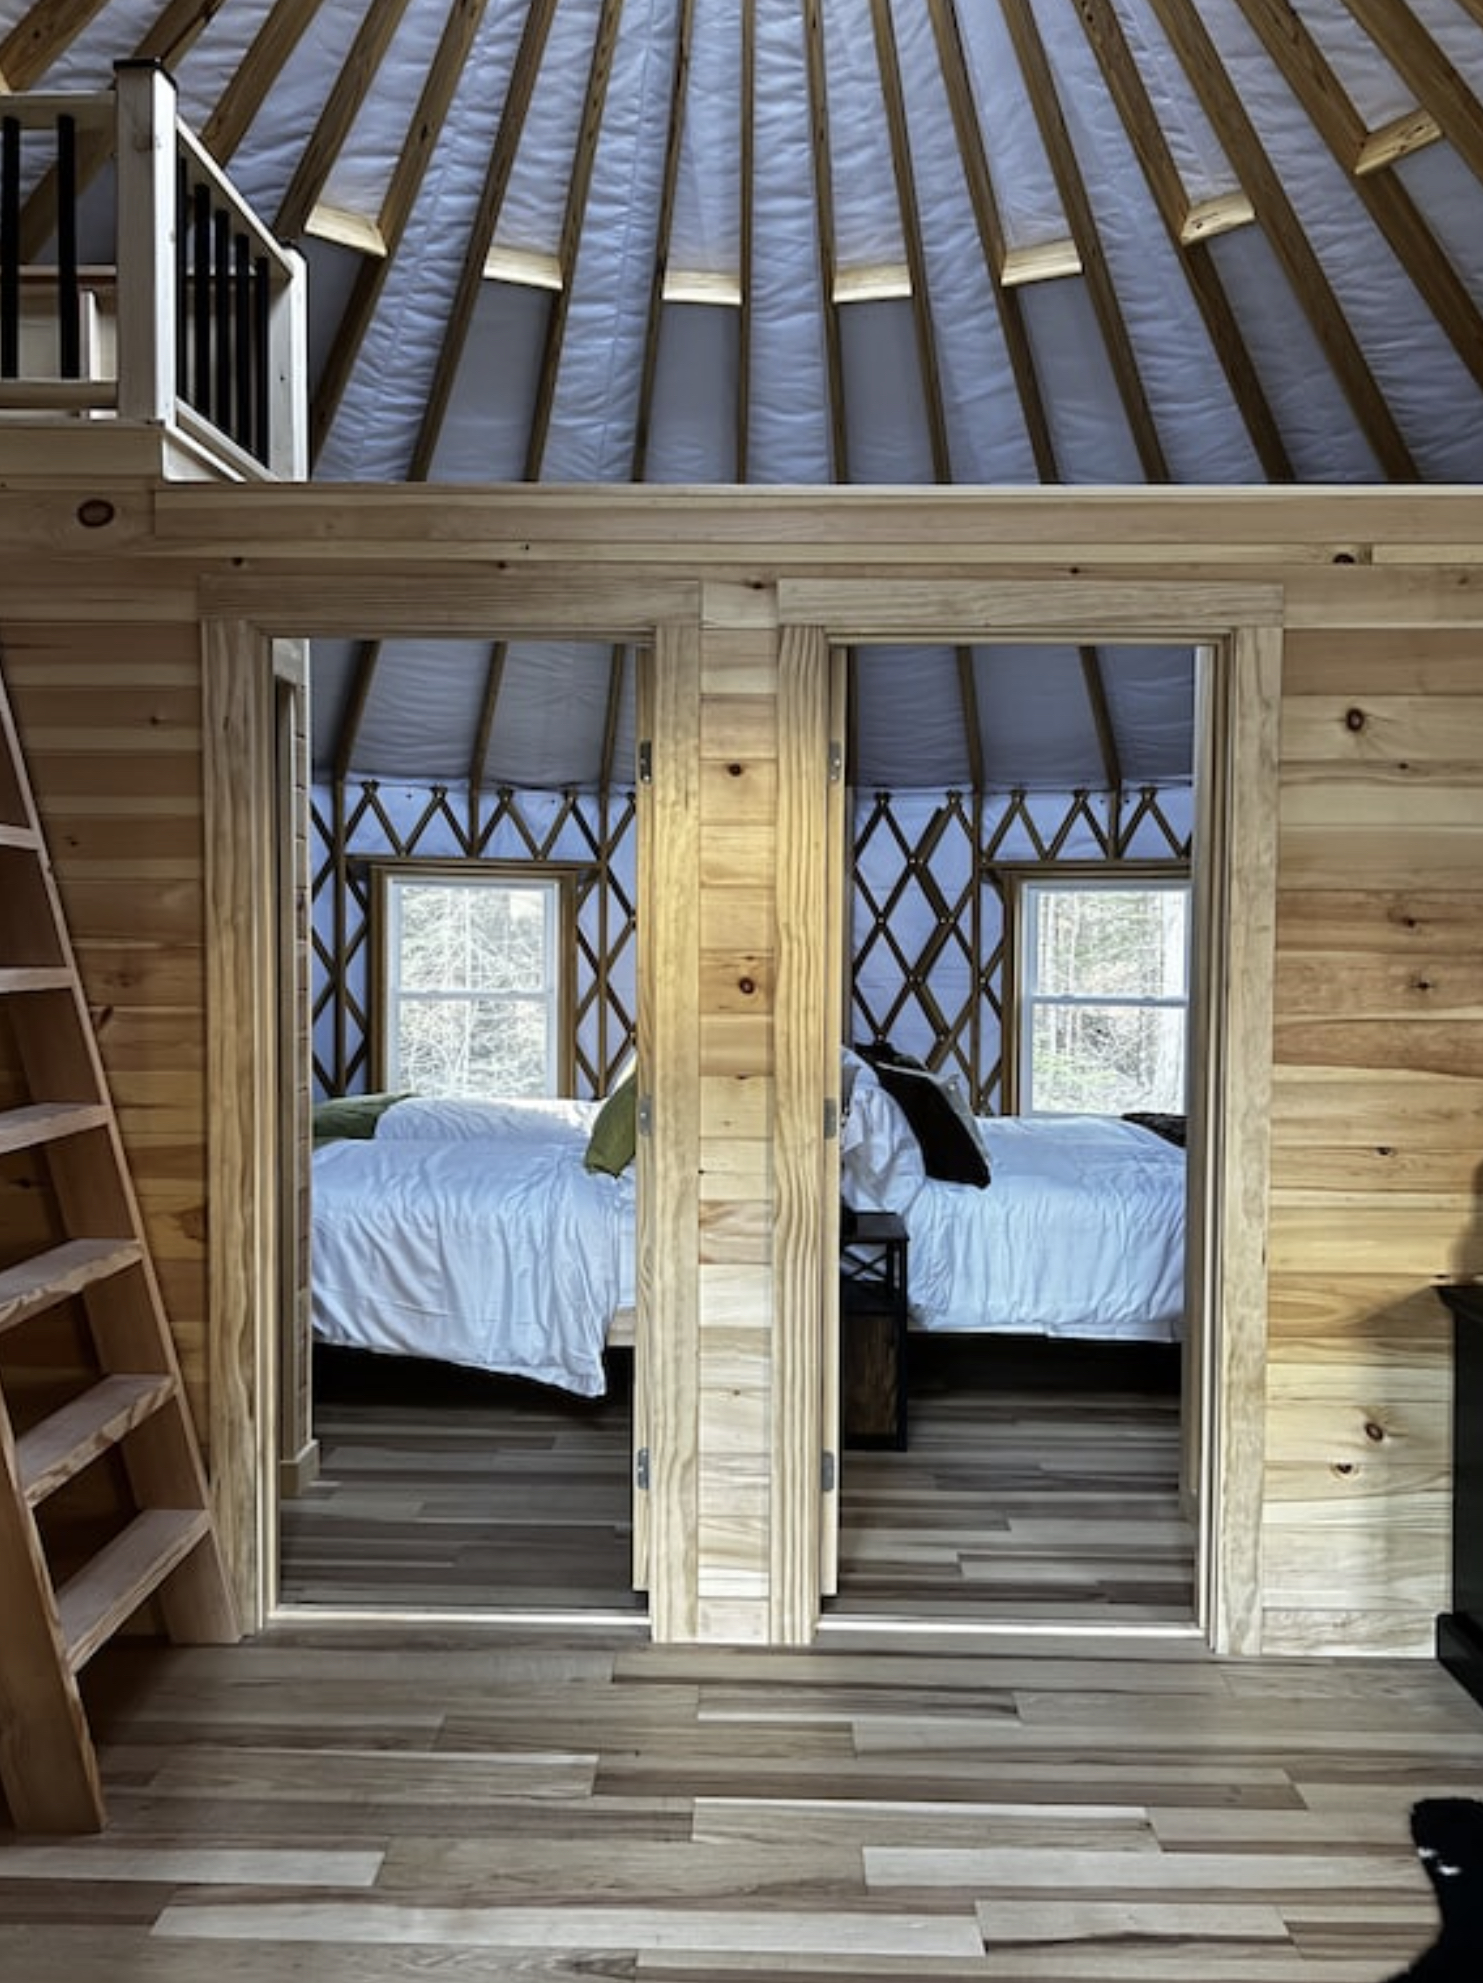 Acadia wilderness lodge bedroom and interior